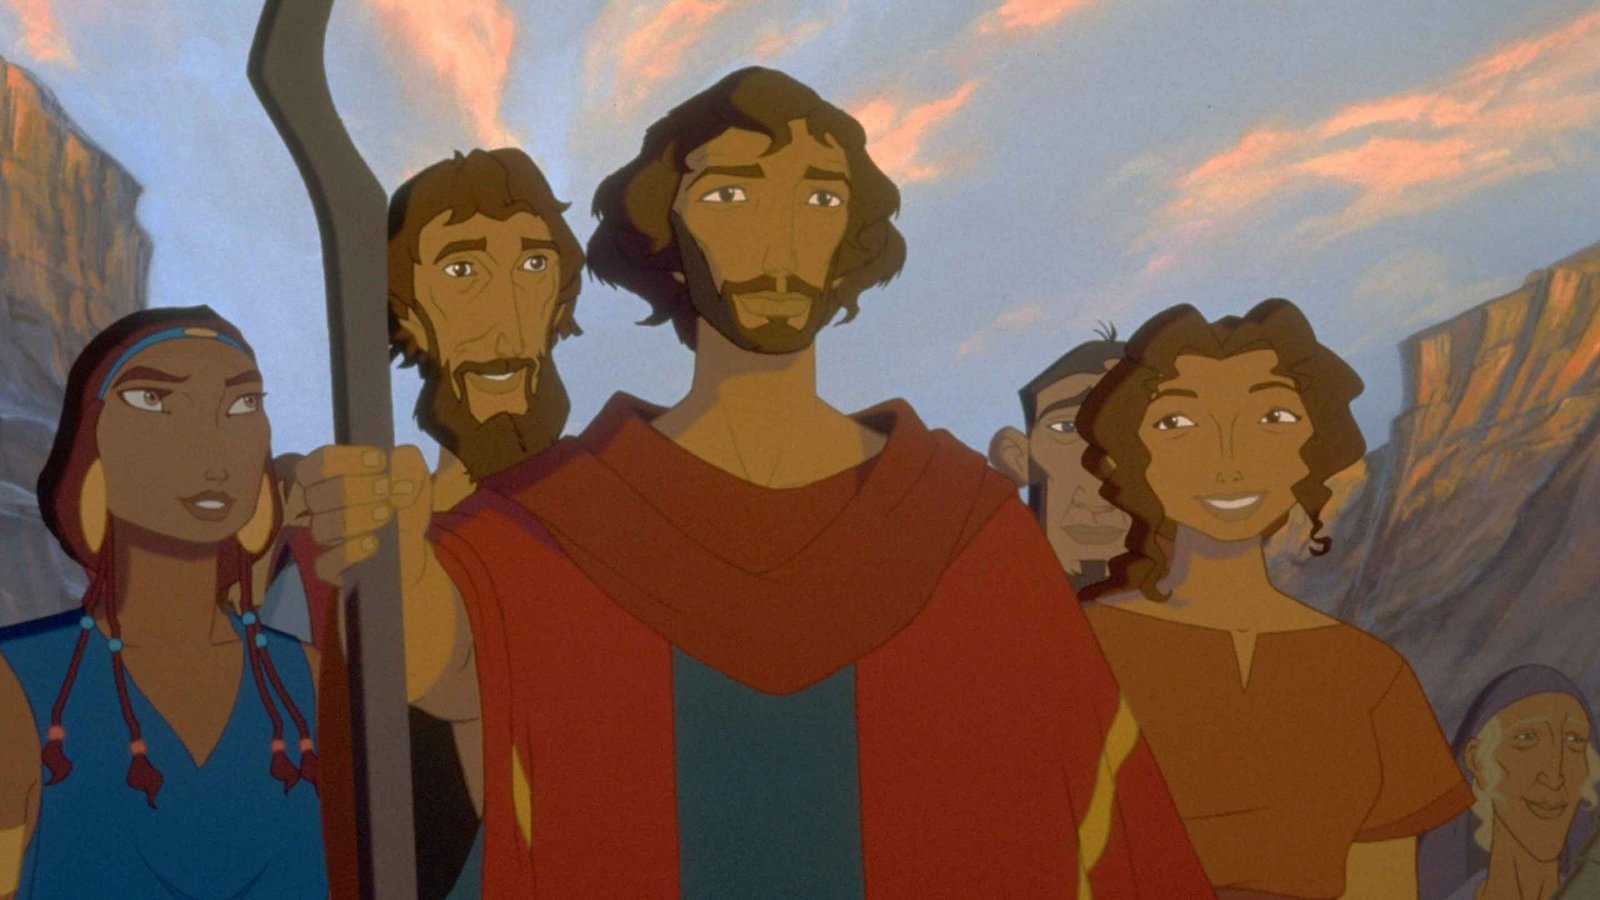 Dreamwork movies: The Prince of Egypt